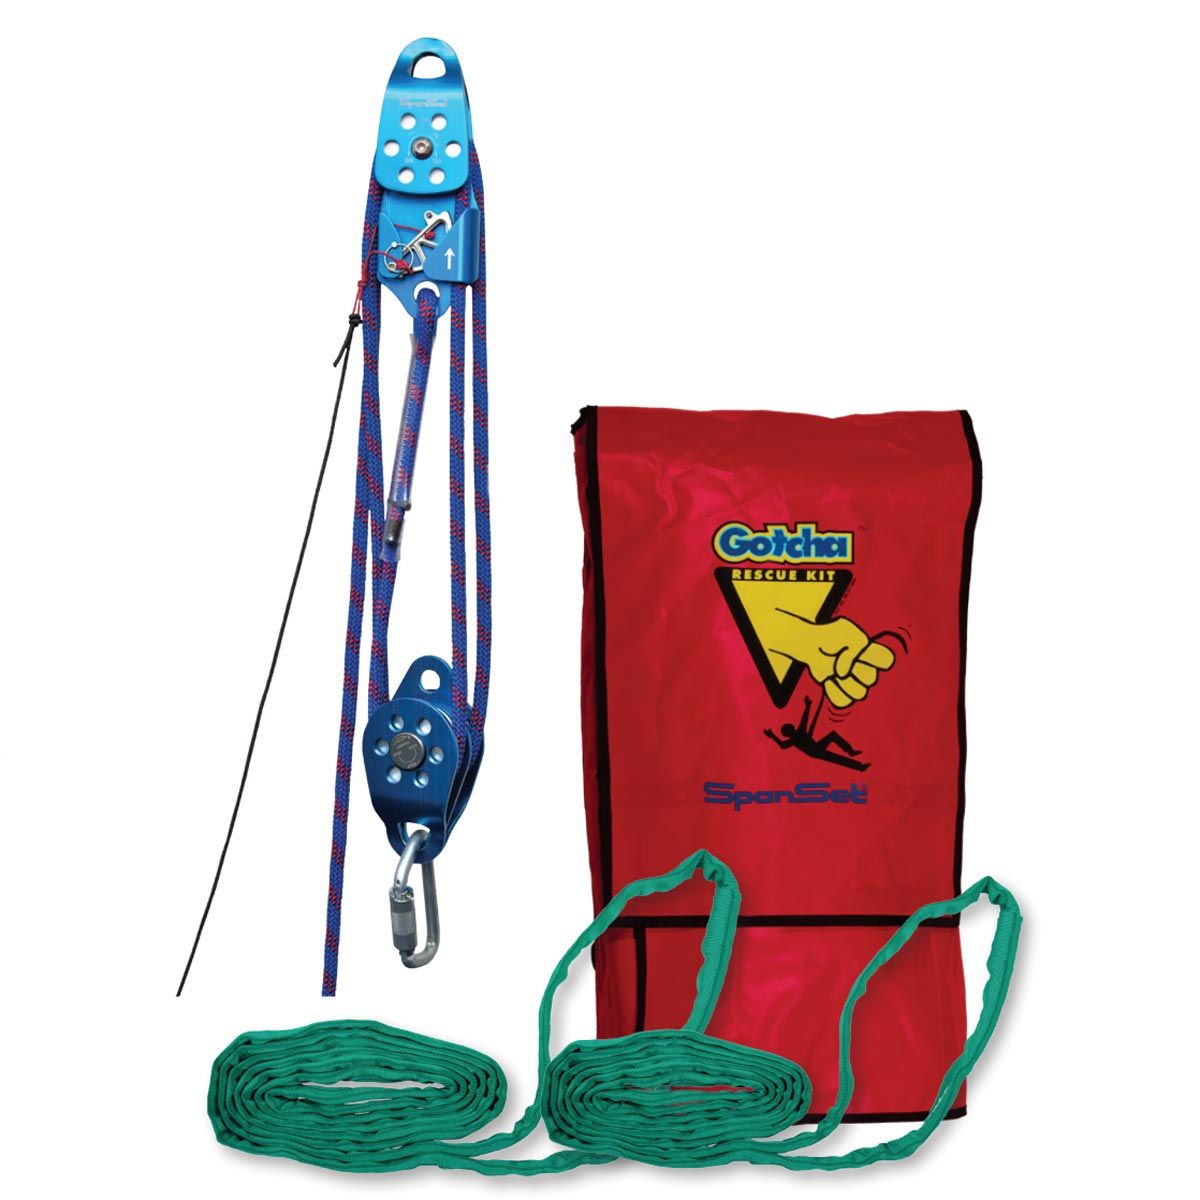 Spanset Rescue Recovery Pulley System - 4000